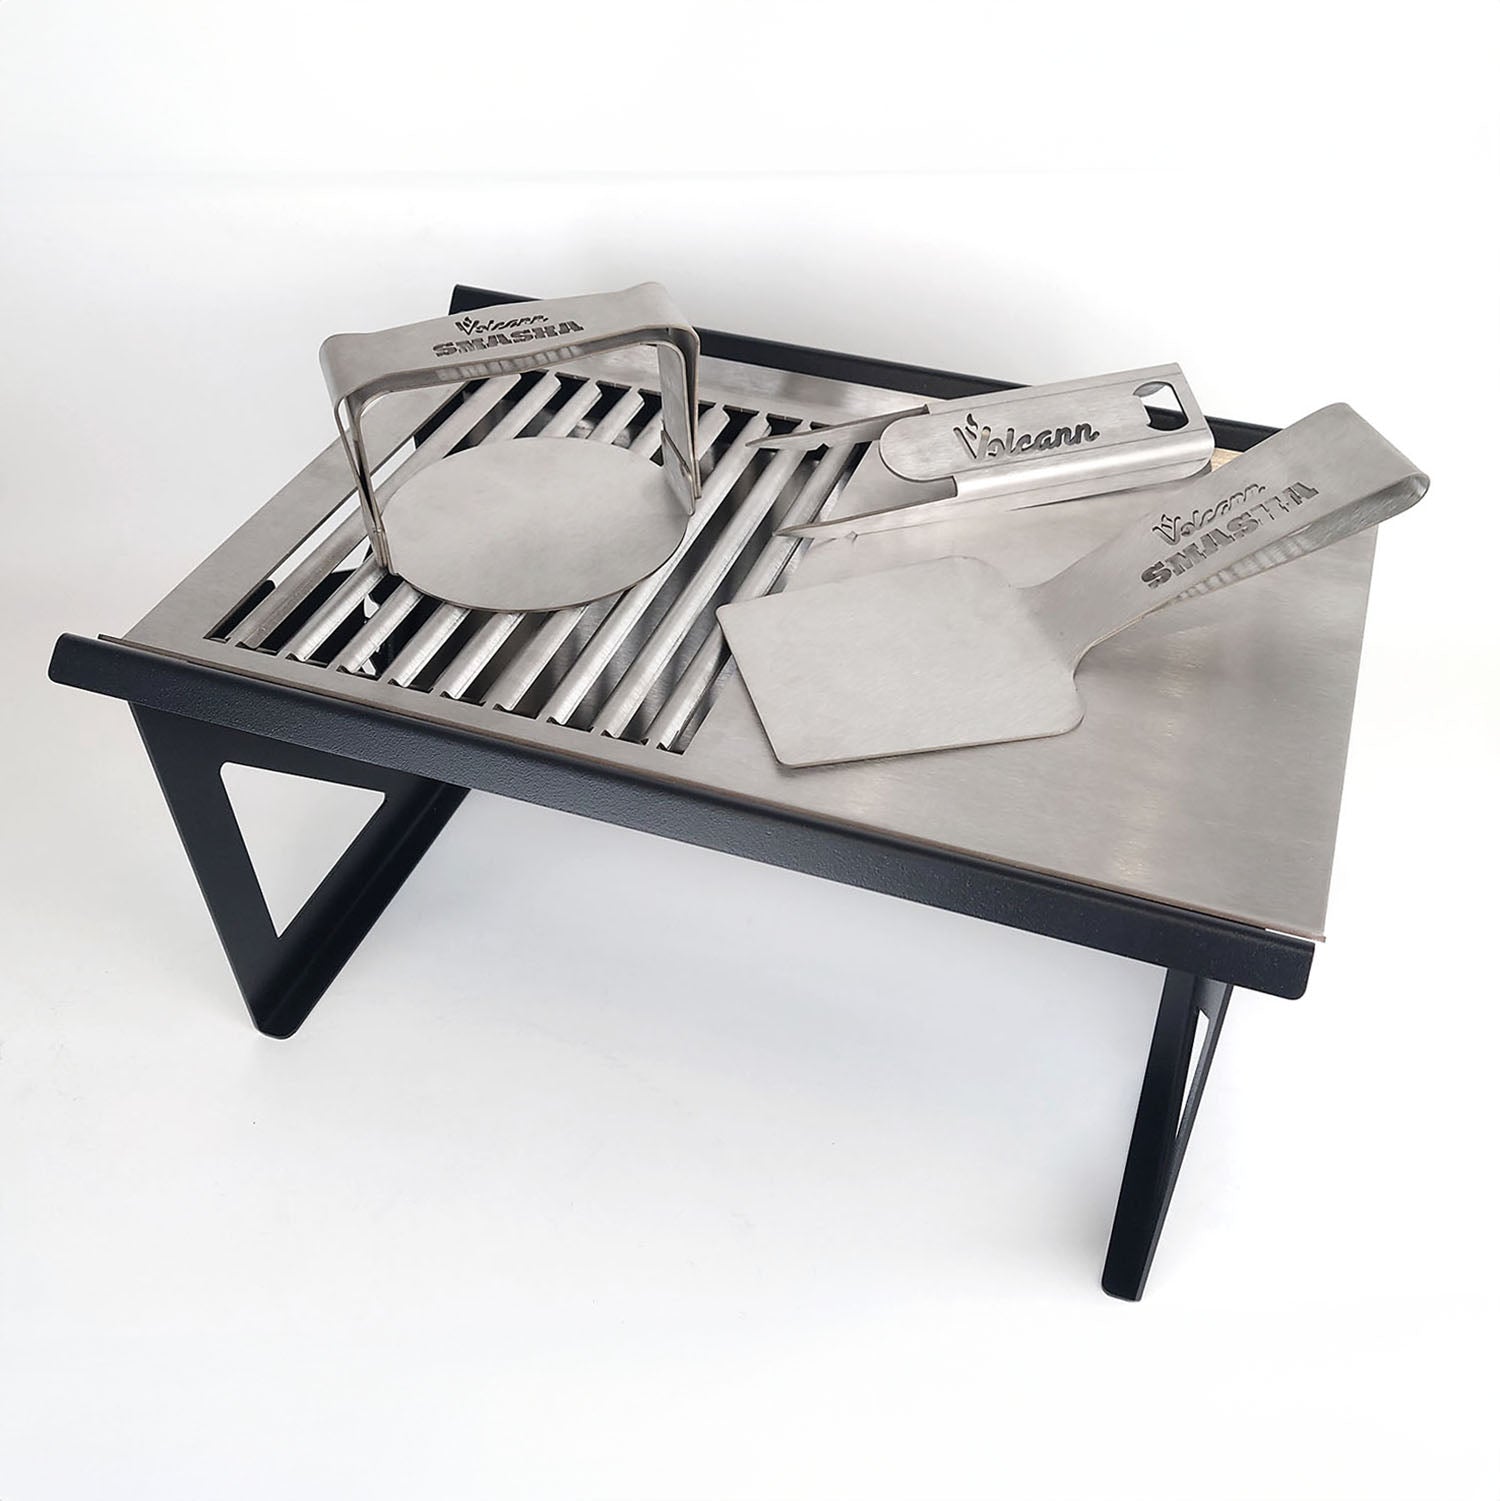 Volcann™ SMASHA Portable BBQ & Smashburger Grill + Stainless Steel Tools - Indoor Outdoors